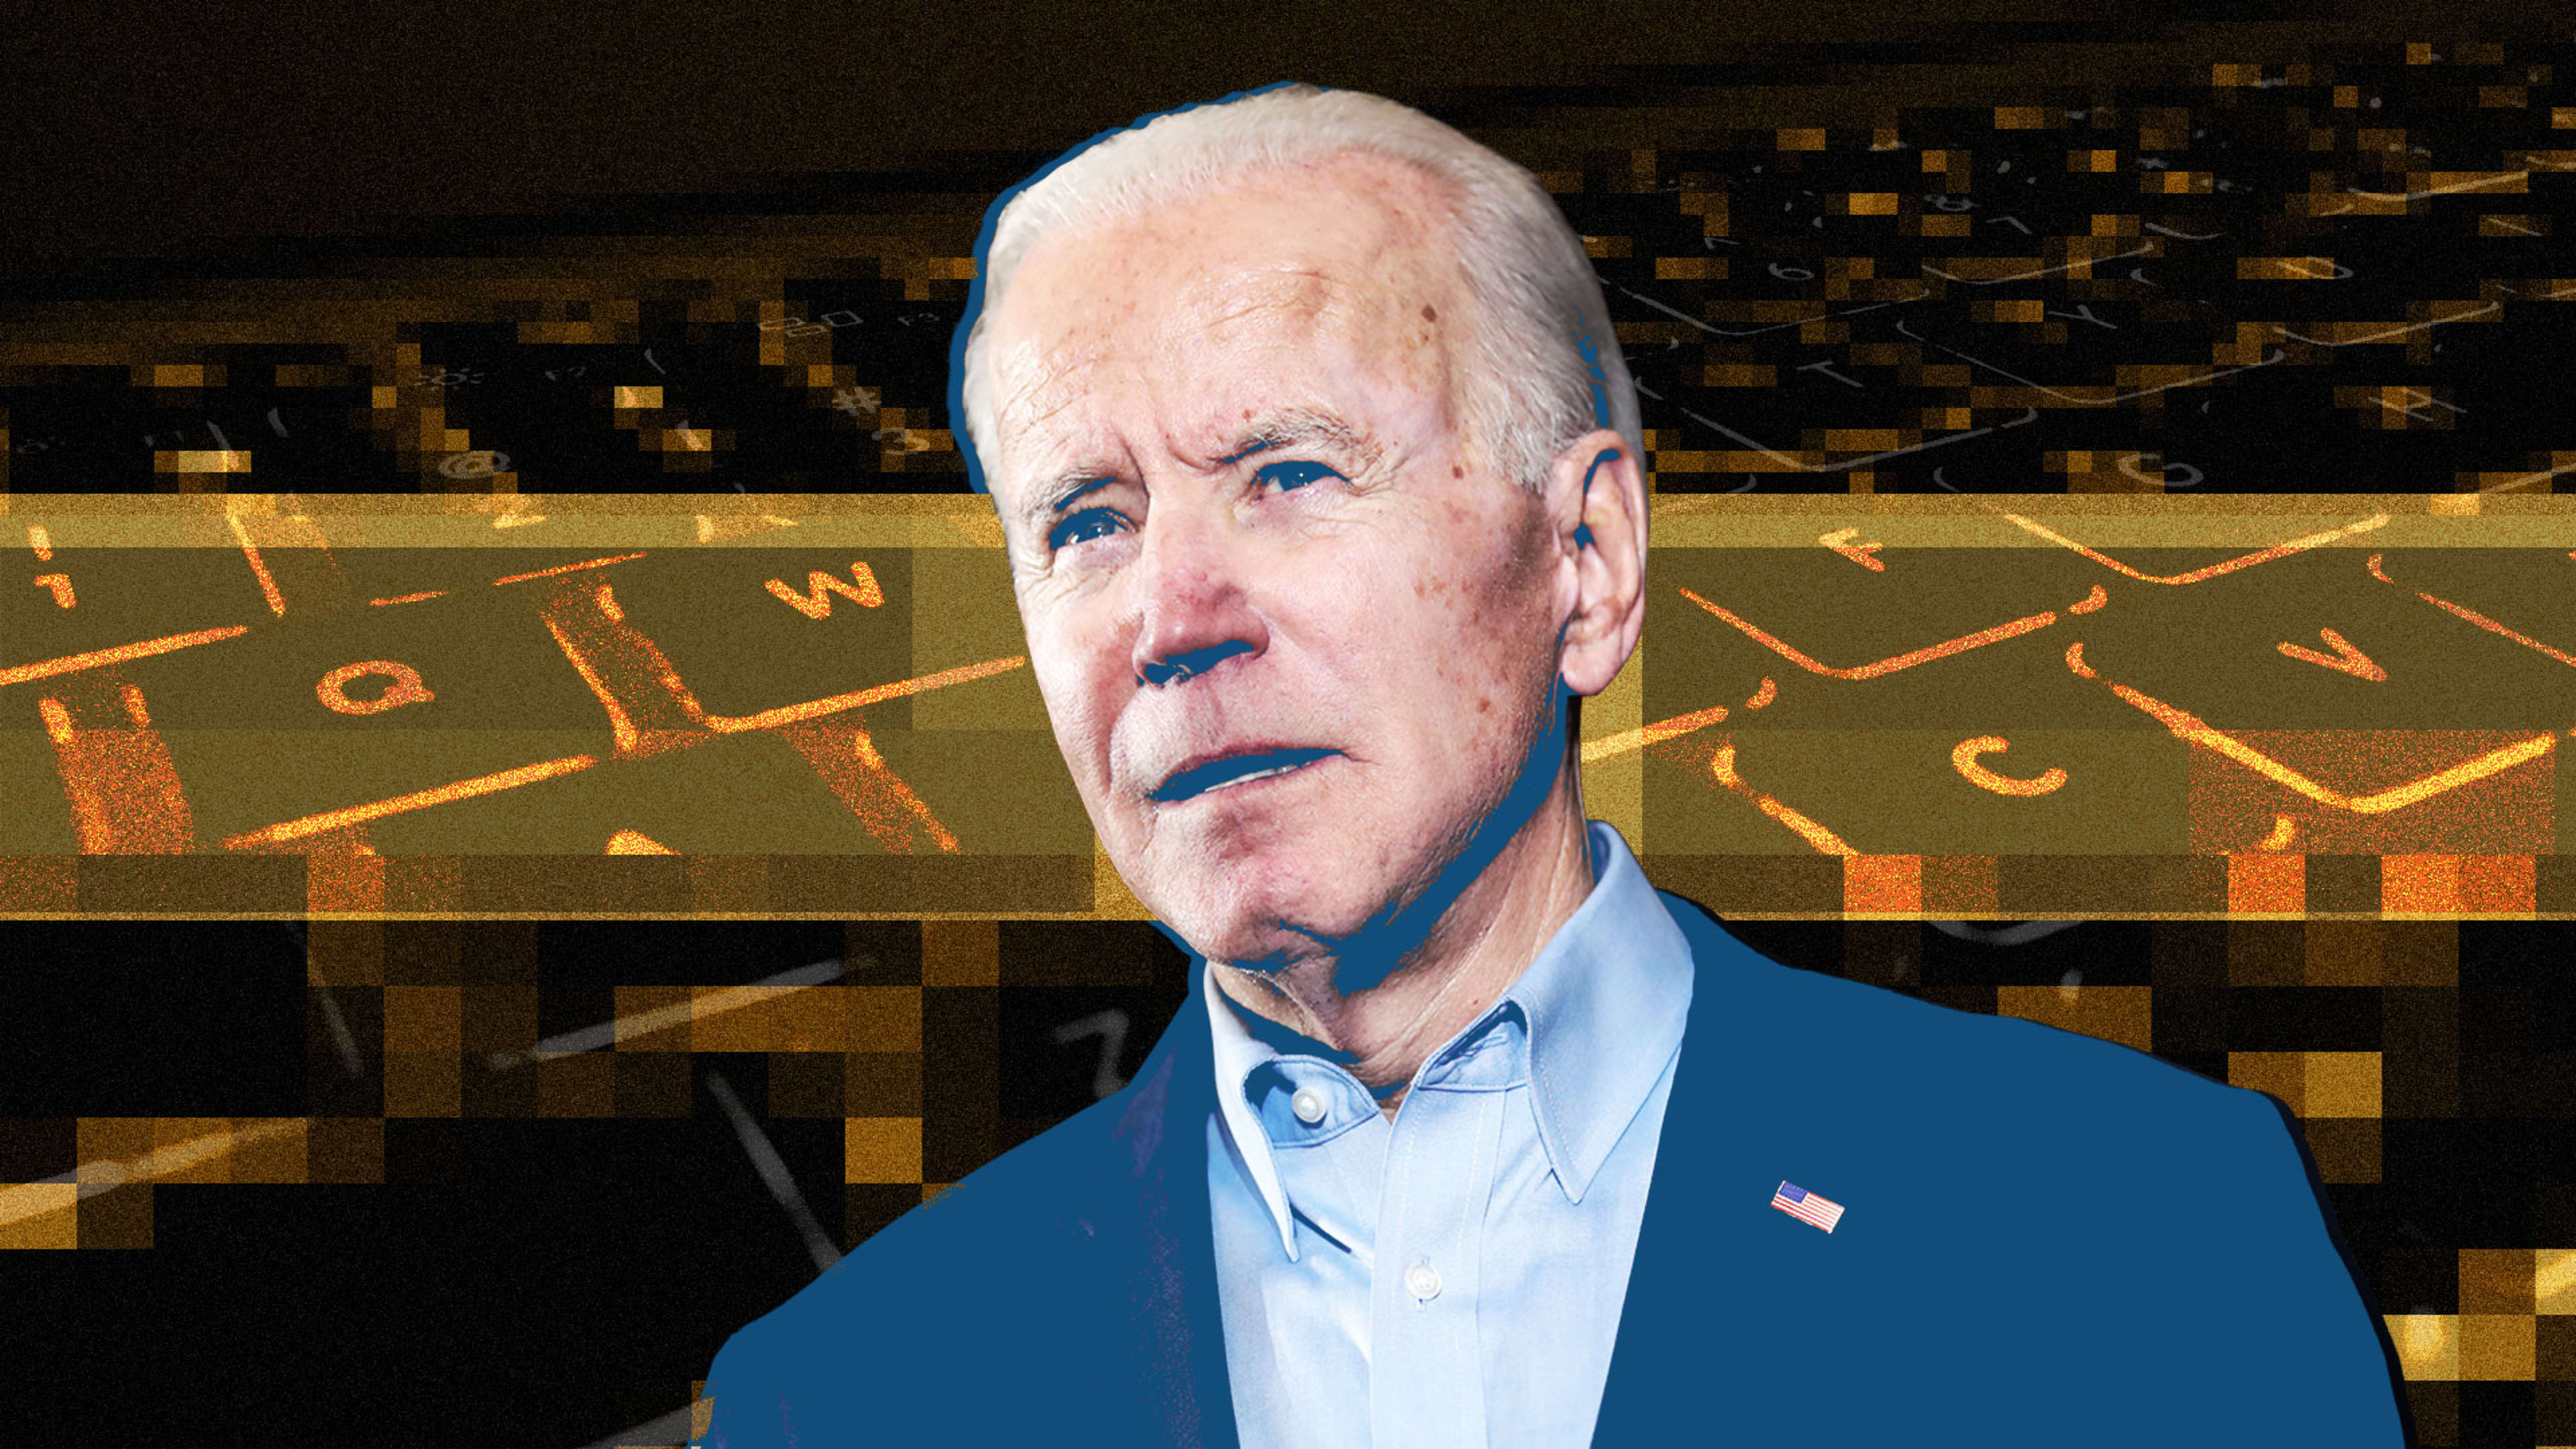 COVID-19 has made the 2020 campaign virtual. That’s a disaster for Biden